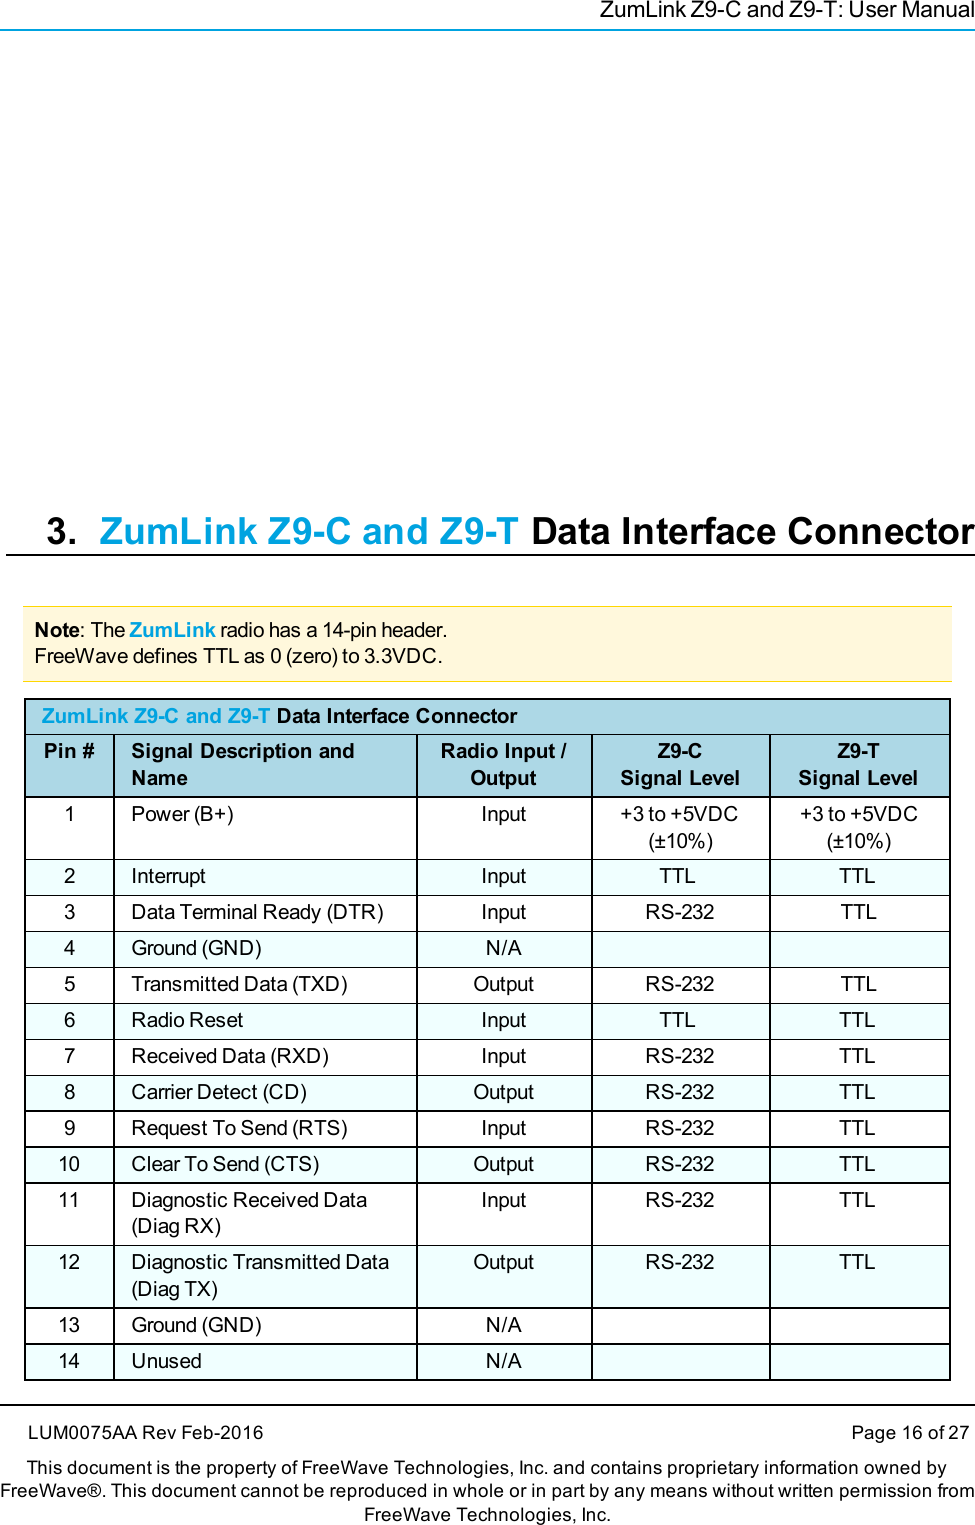 ZumLink Z9-C and Z9-T: User Manual3. ZumLink Z9-C and Z9-T Data Interface ConnectorNote: The ZumLink radio has a 14-pin header.FreeWave defines TTL as 0 (zero) to 3.3VDC.ZumLink Z9-C and Z9-T Data Interface ConnectorPin # Signal Description andNameRadio Input /OutputZ9-CSignal LevelZ9-TSignal Level1 Power (B+) Input +3 to +5VDC(±10%)+3 to +5VDC(±10%)2 Interrupt Input TTL TTL3 Data Terminal Ready (DTR) Input RS-232 TTL4 Ground (GND) N/A5 Transmitted Data (TXD) Output RS-232 TTL6 Radio Reset Input TTL TTL7 Received Data (RXD) Input RS-232 TTL8 Carrier Detect (CD) Output RS-232 TTL9 Request To Send (RTS) Input RS-232 TTL10 Clear To Send (CTS) Output RS-232 TTL11 Diagnostic Received Data(Diag RX)Input RS-232 TTL12 Diagnostic Transmitted Data(Diag TX)Output RS-232 TTL13 Ground (GND) N/A14 Unused N/ALUM0075AA Rev Feb-2016 Page 16 of 27This document is the property of FreeWave Technologies, Inc. and contains proprietary information owned byFreeWave®. This document cannot be reproduced in whole or in part by any means without written permission fromFreeWave Technologies, Inc.